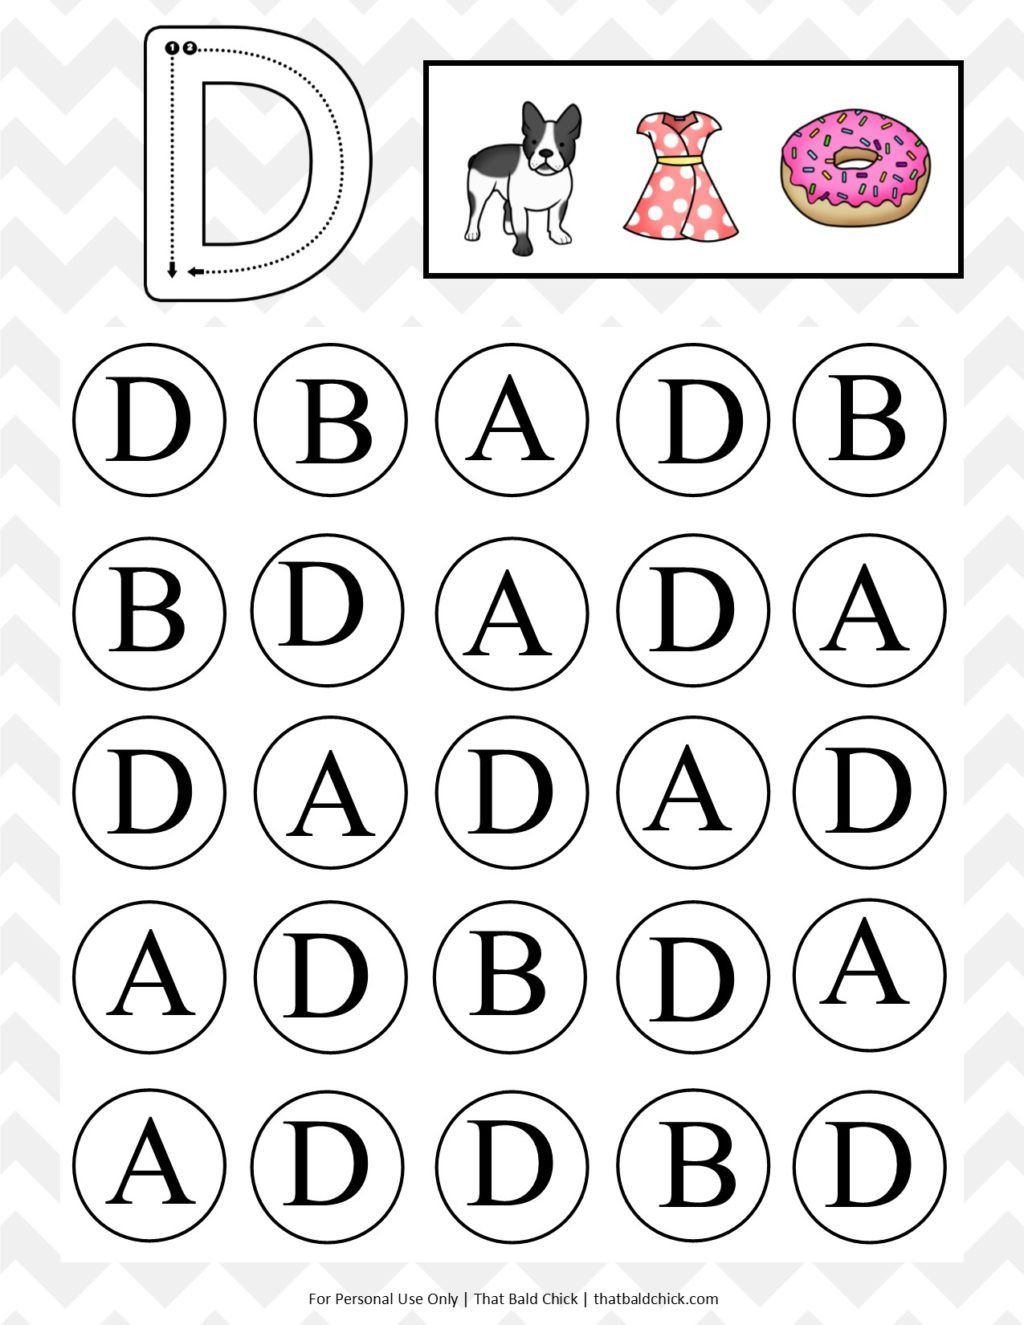 Practice Letter Recognition With This Free Printable Uppercase Do 